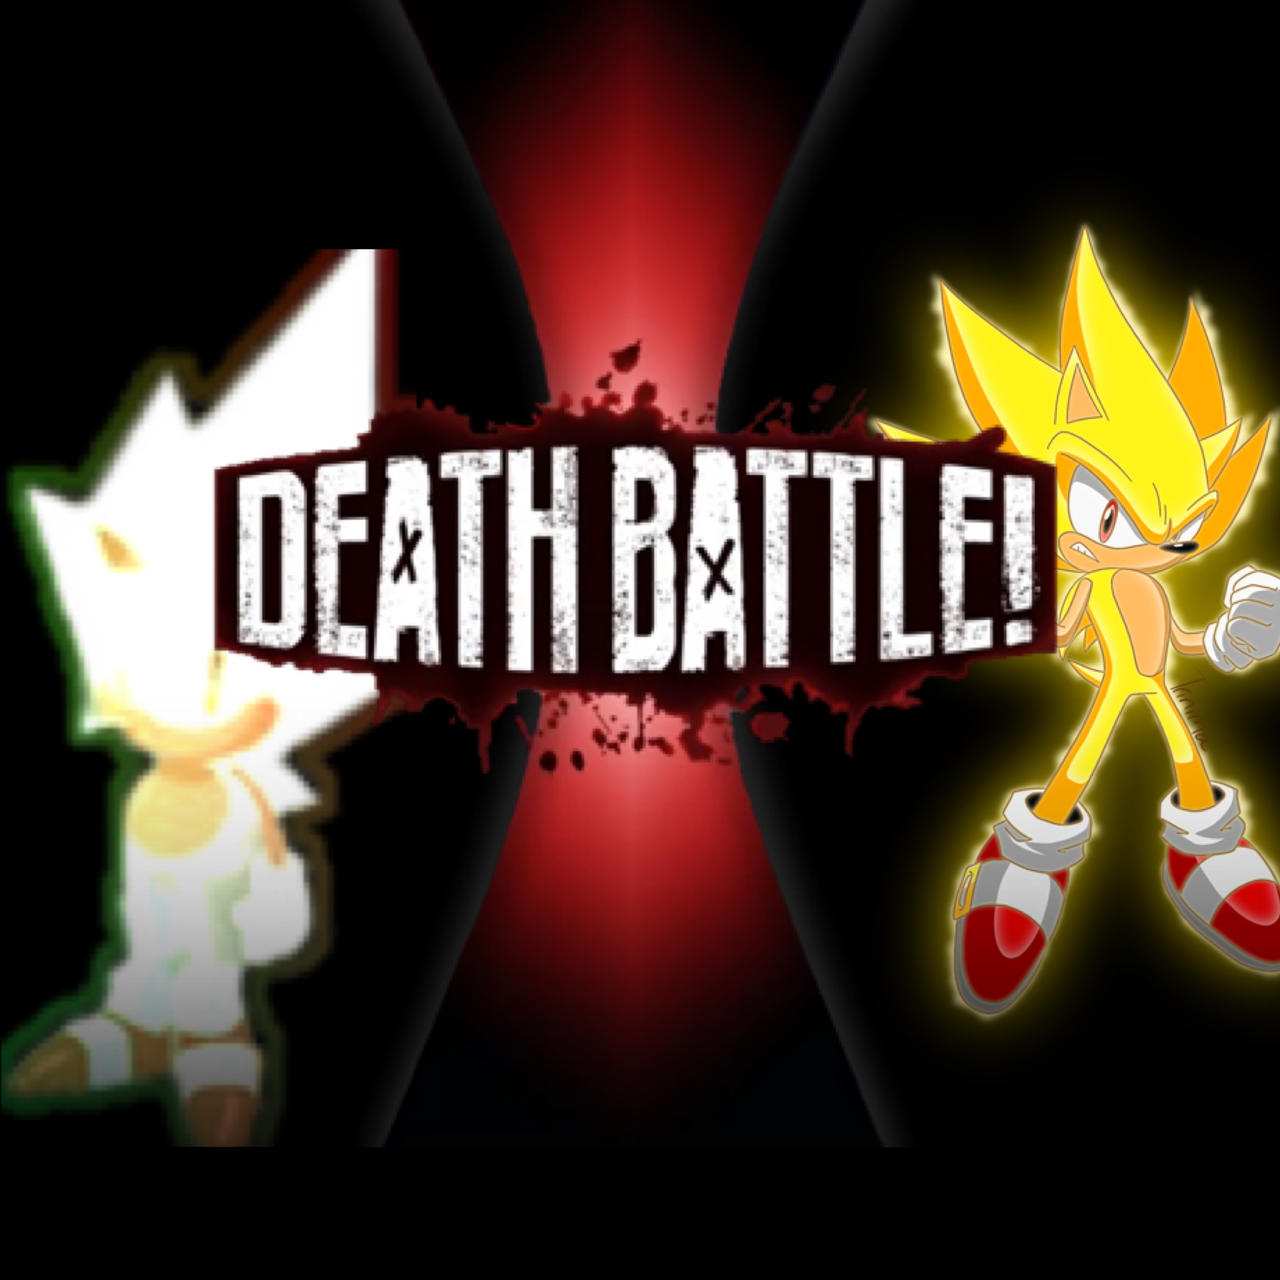 Who would win in a battle royale between Classic Sonic, Modern